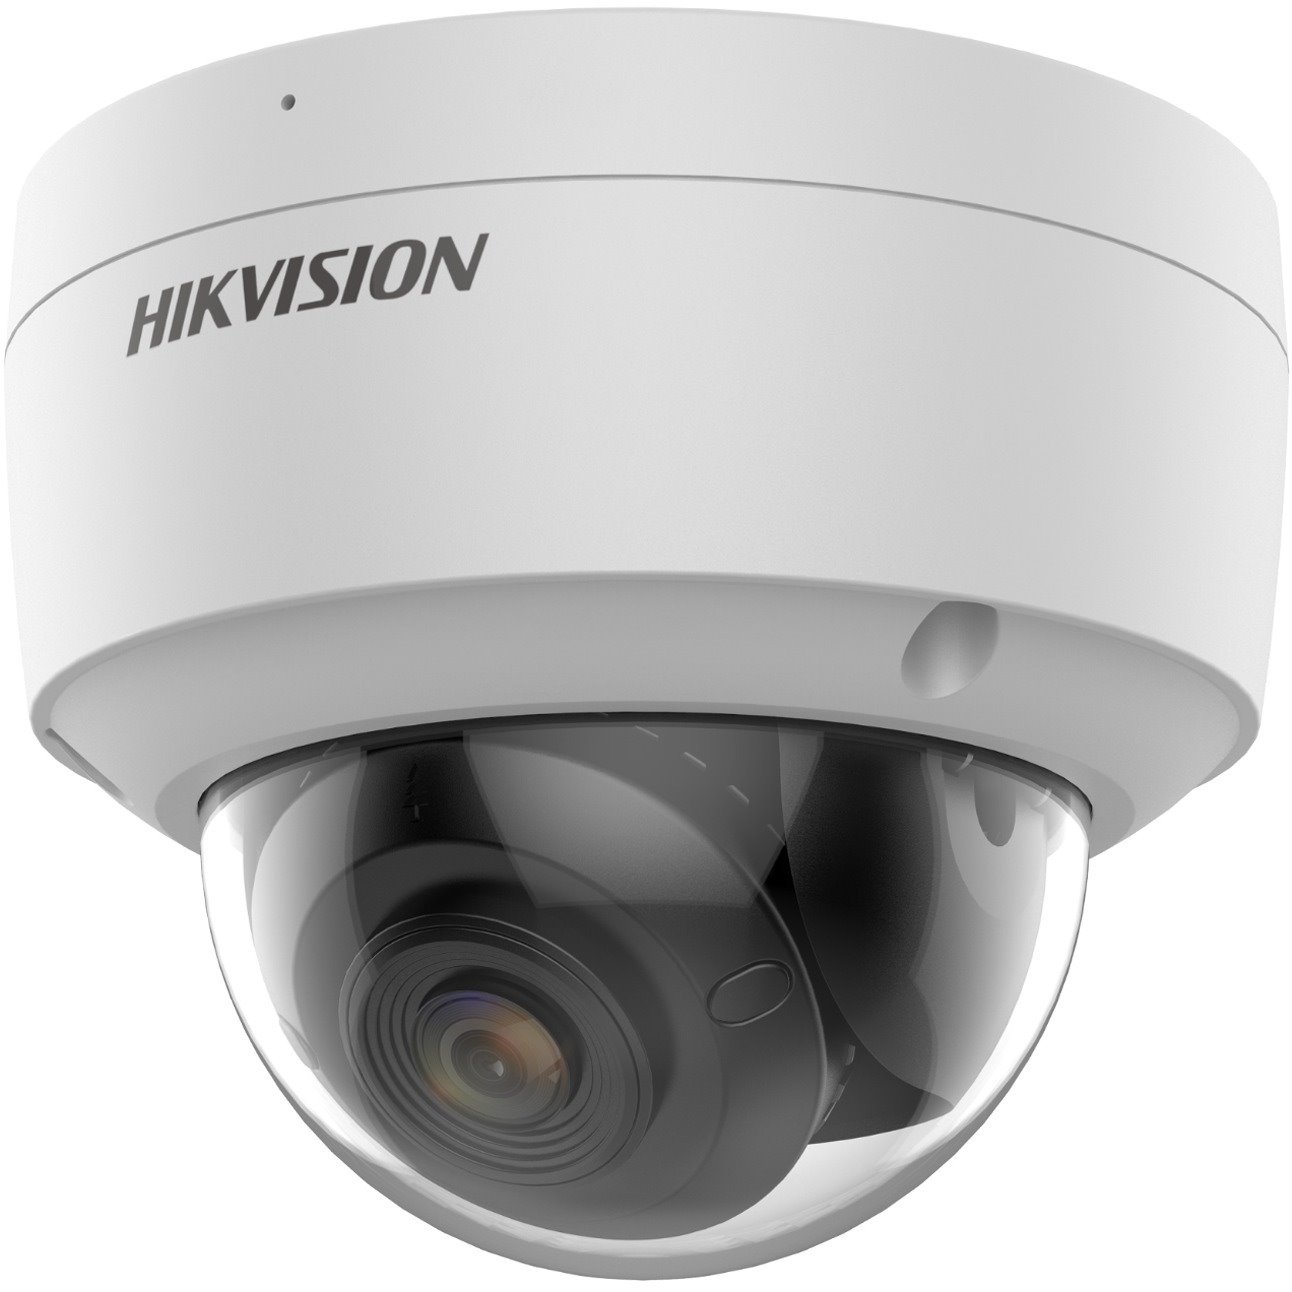 Hikvision EasyIP DS-2CD2147G2-SU 4 Megapixel Outdoor HD Network Camera - Dome